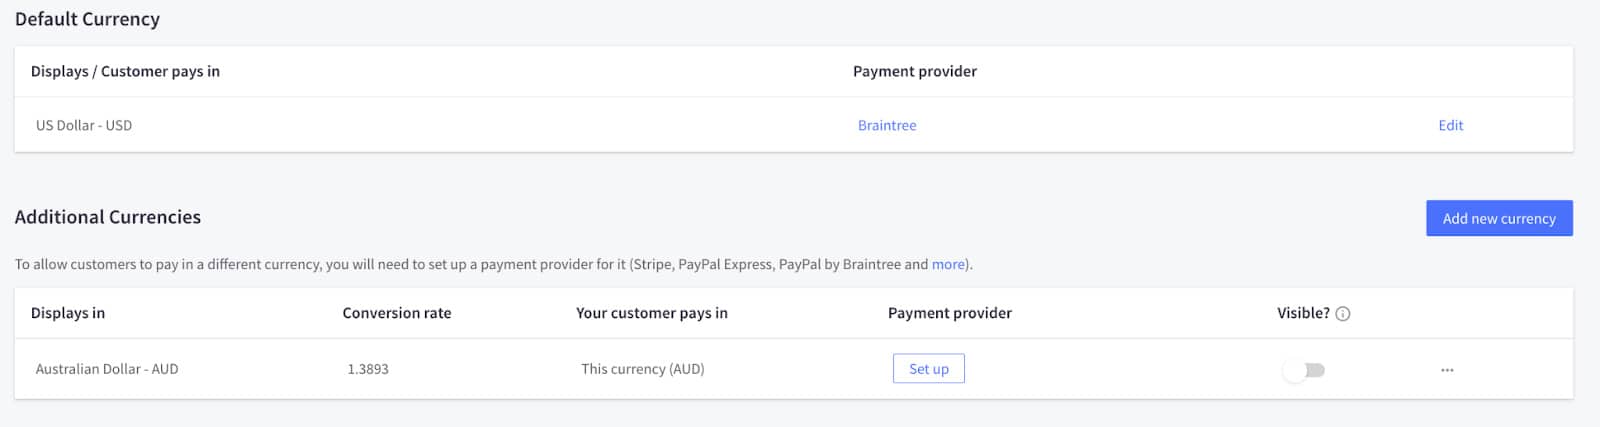 Set up additional currencies on BigCommerce.